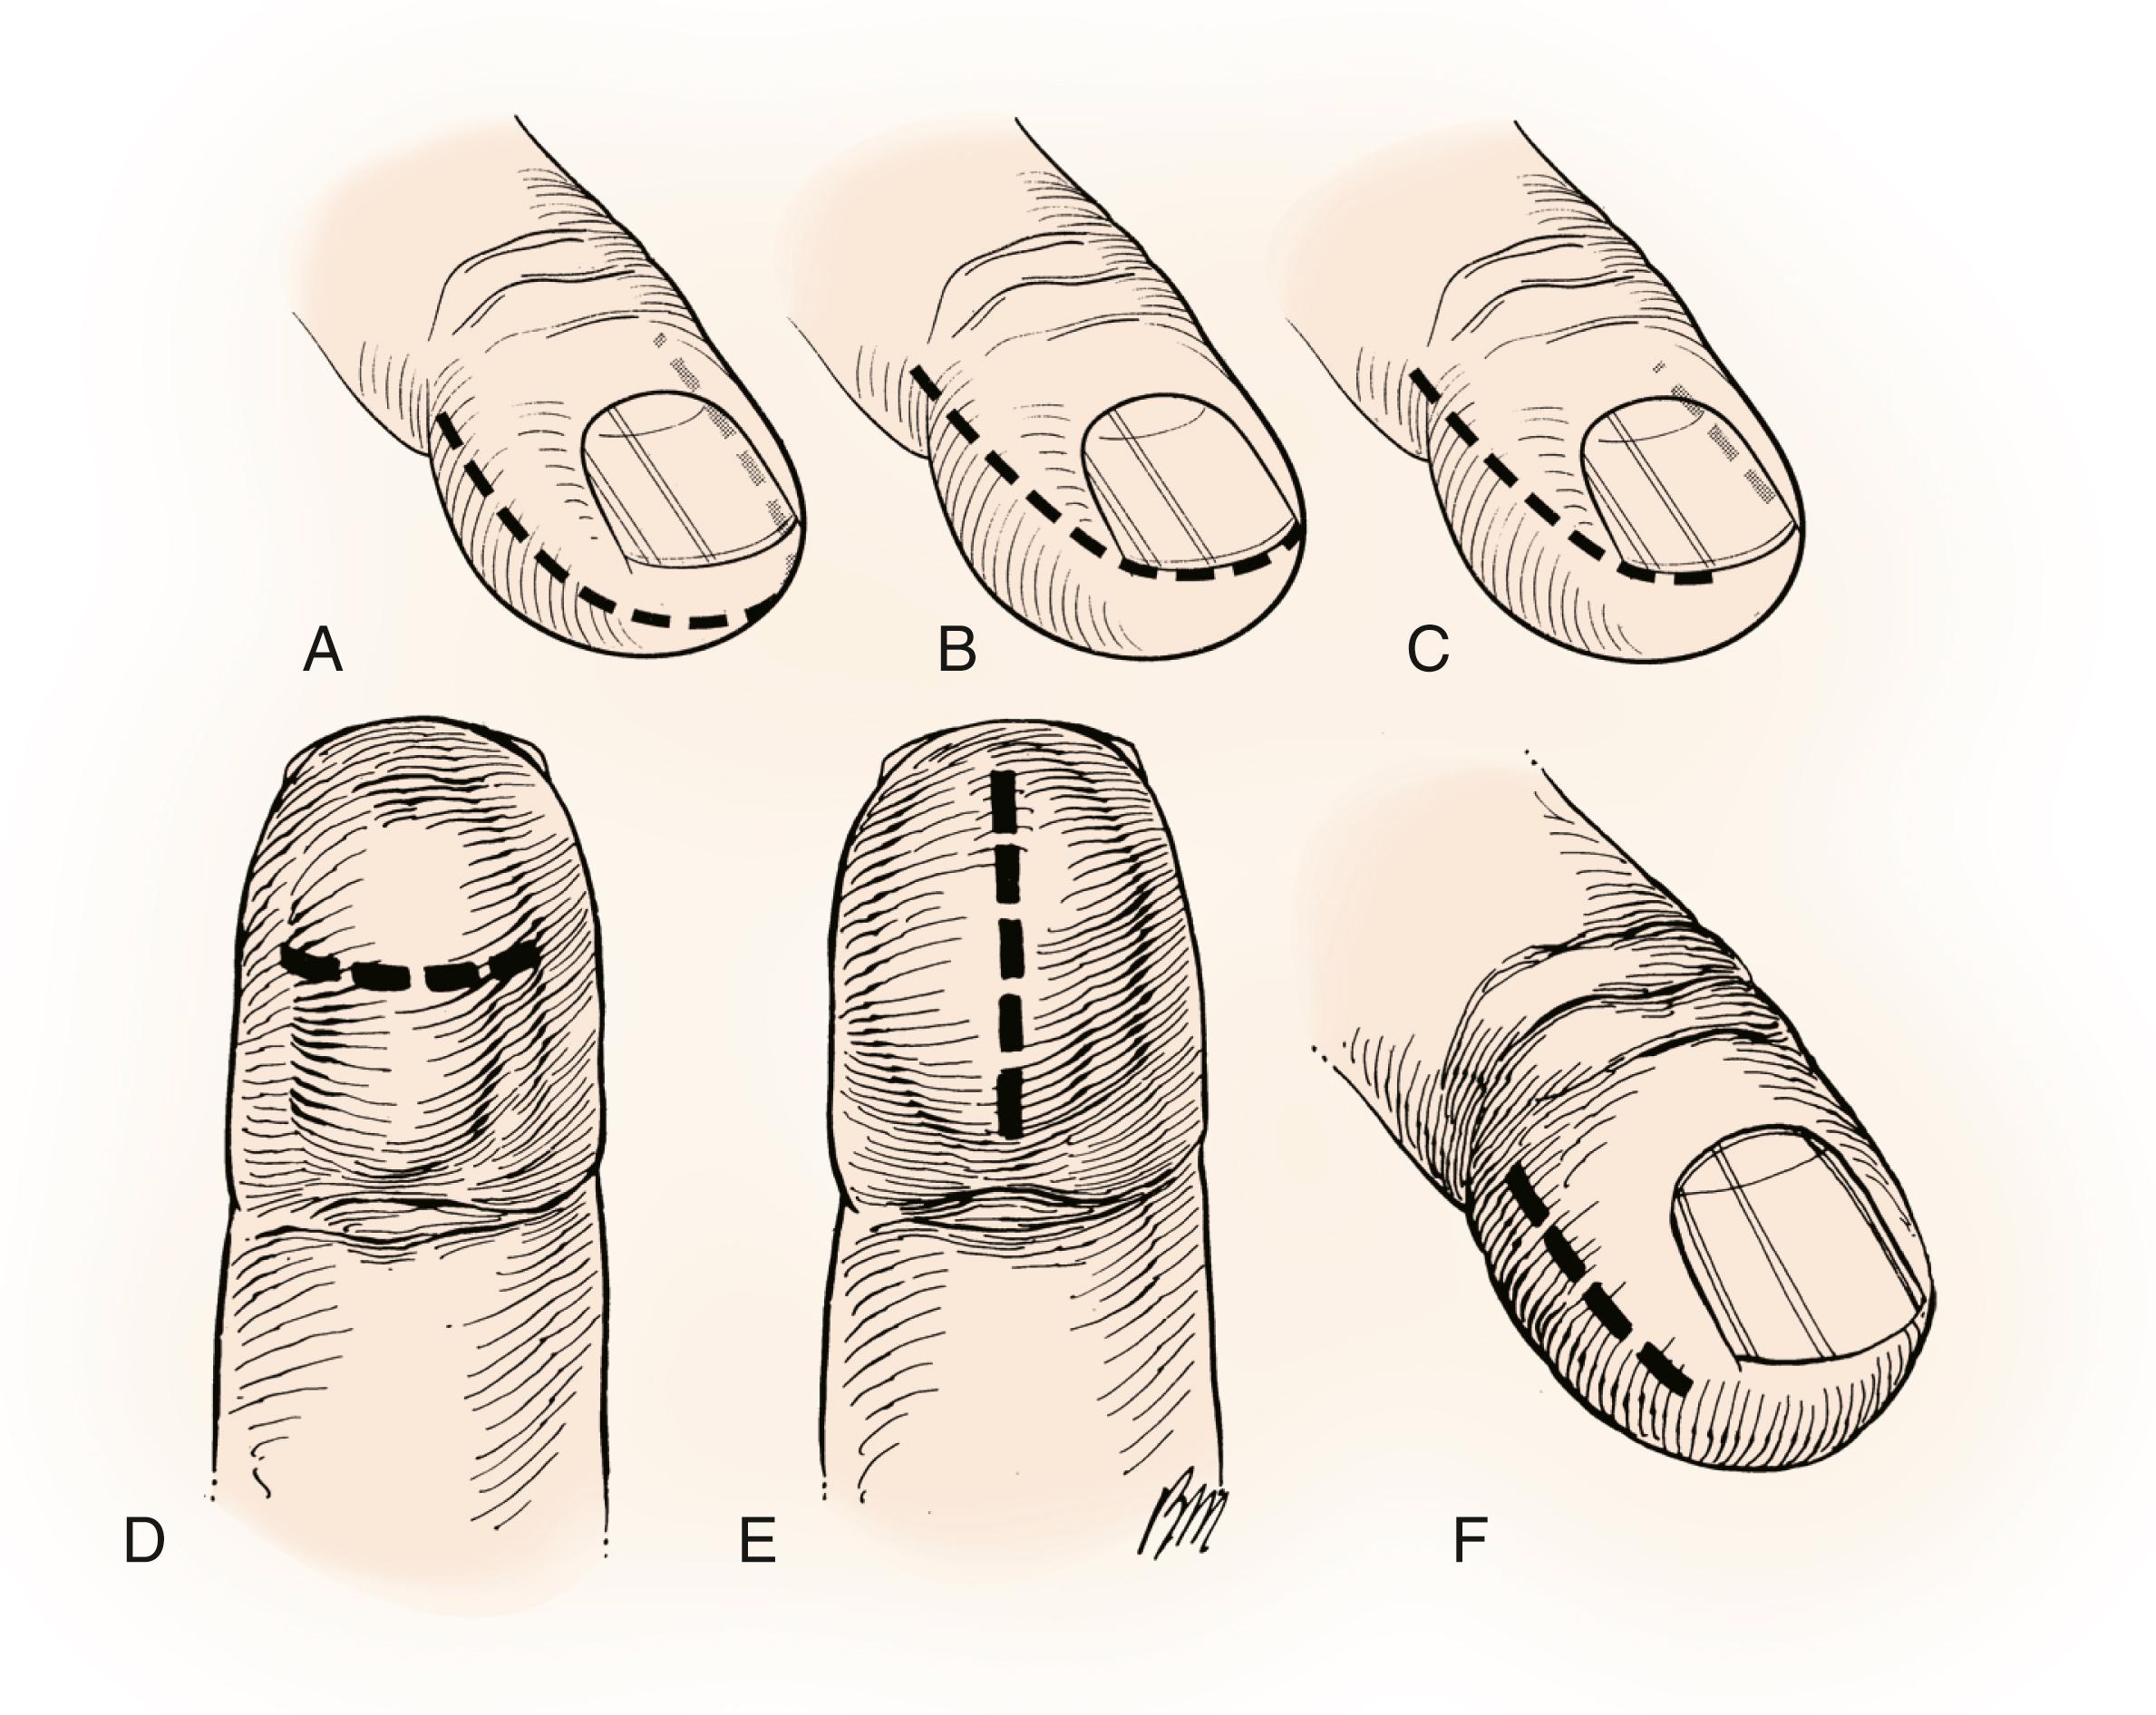 Fig. 2.10, Incisions for drainage of felons. A, Fish-mouth incision. This approach is associated with significant complications and should not be used. B, Hockey-stick incision. The incision begins in the midaxial line, aims for the corner of the nail, and passes across the finger in the natural line between the skin and nail matrix (see text discussion). C, Abbreviated hockey-stick incision with counterincision on the opposite side. An alternative to the full hockey-stick incision is to make this incision shorter and make a second incision on the opposite side of the pulp (faint dotted line) . D, Volar drainage is useful if the abscess points volarward, but this incision risks injury to the digital nerves. E, Alternative volar approach. There is less risk to the digital nerves, but the incision should not touch or cross the DIP joint flexion crease. F, Unilateral longitudinal approach. This incision is the authors’ preferred method for treatment of most felons.